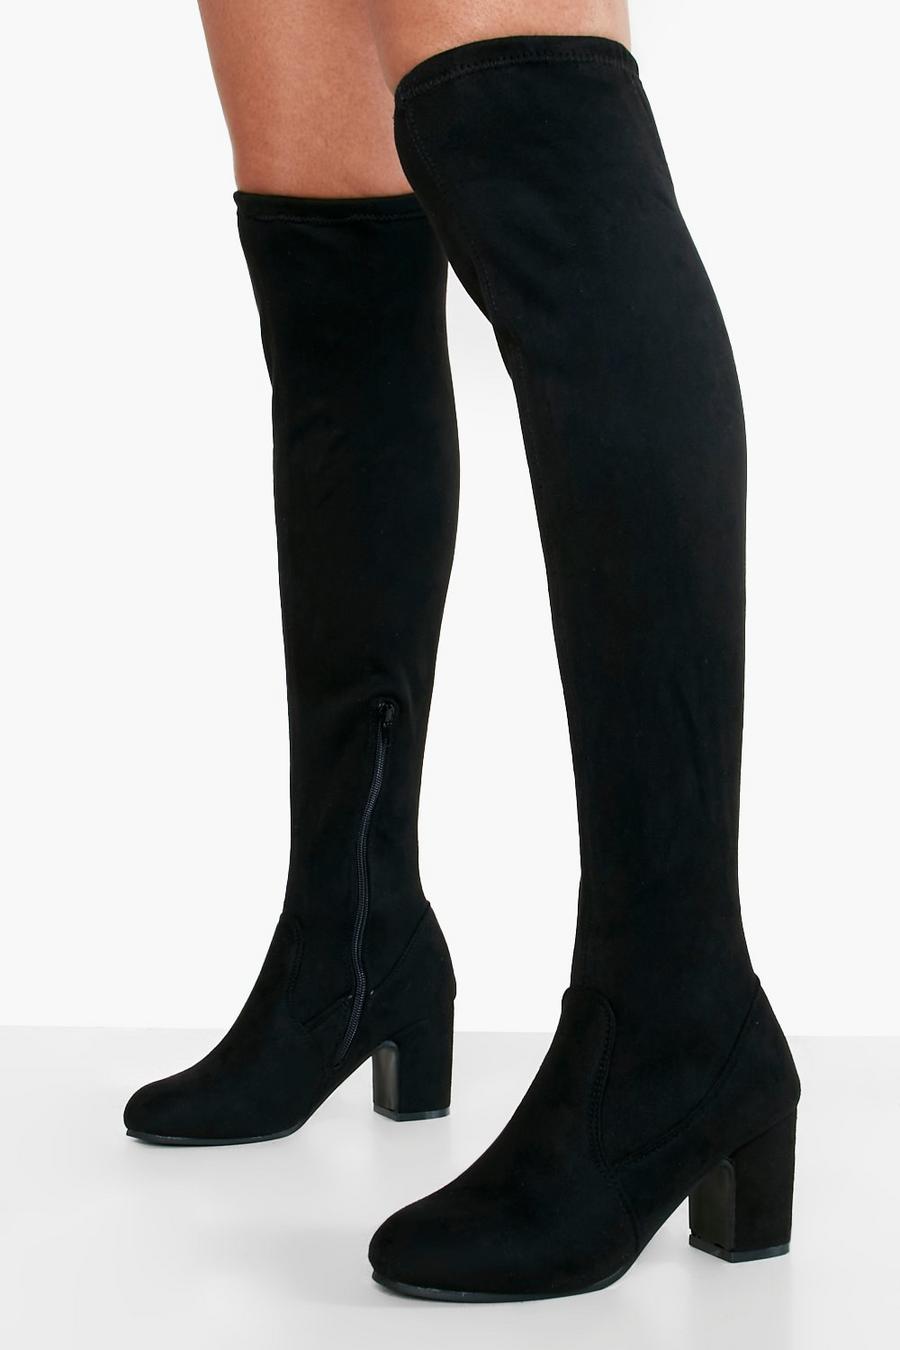 Black Wide Fit Block Heel Stretch Over The Knee Boot